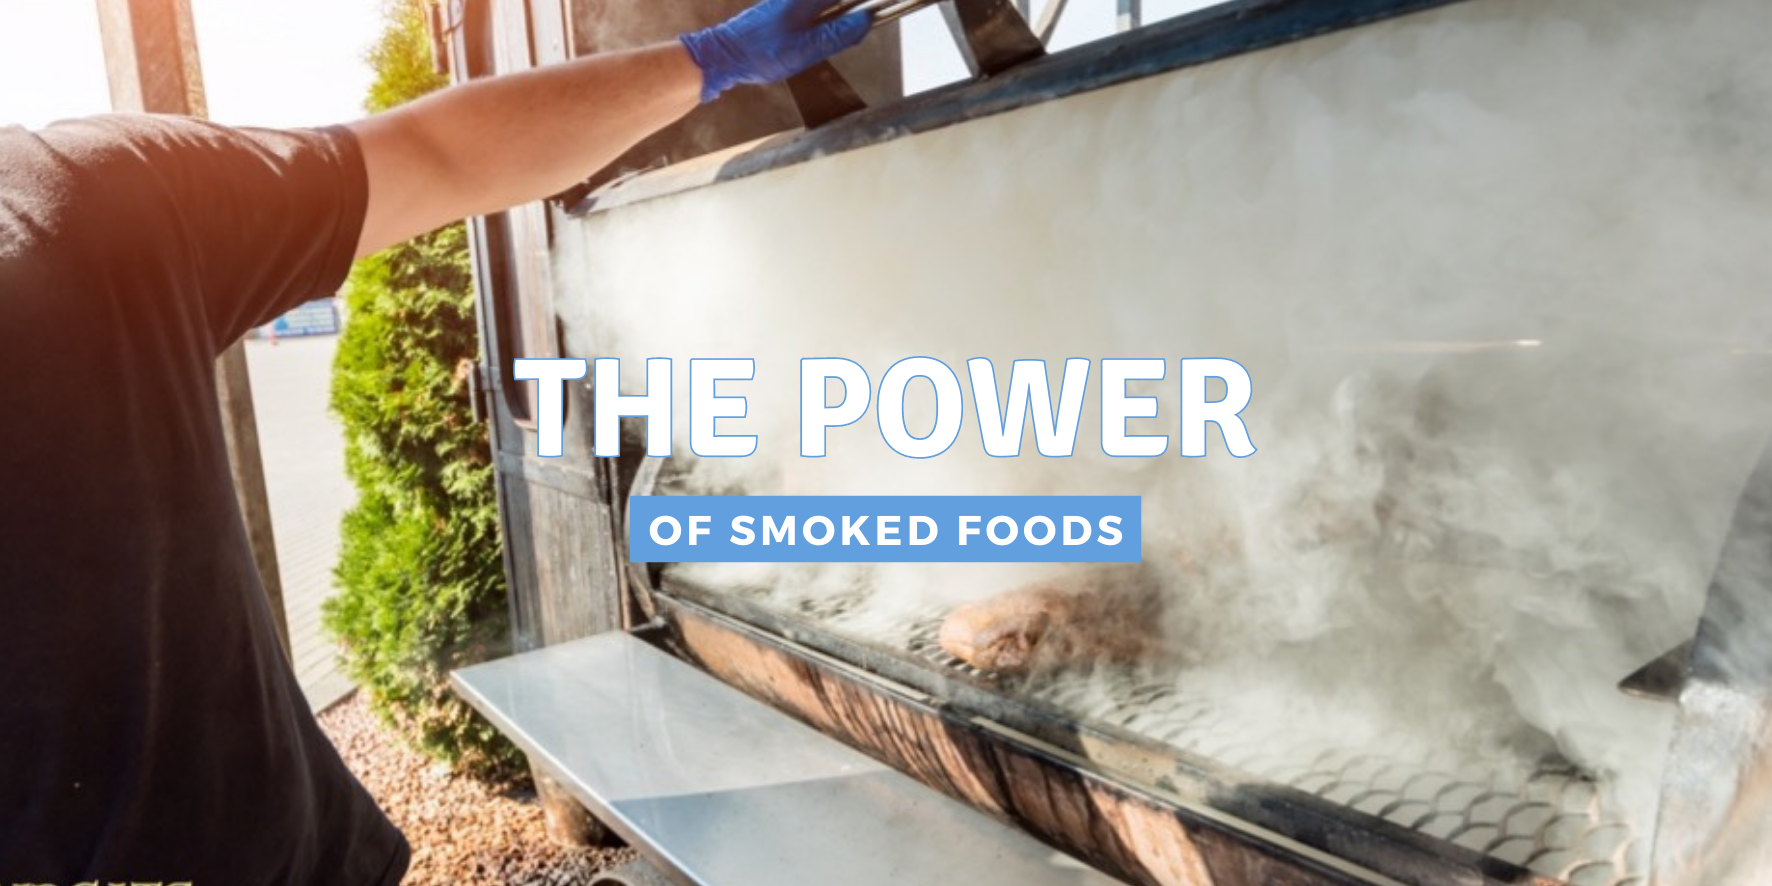 The Power of Smoked Foods